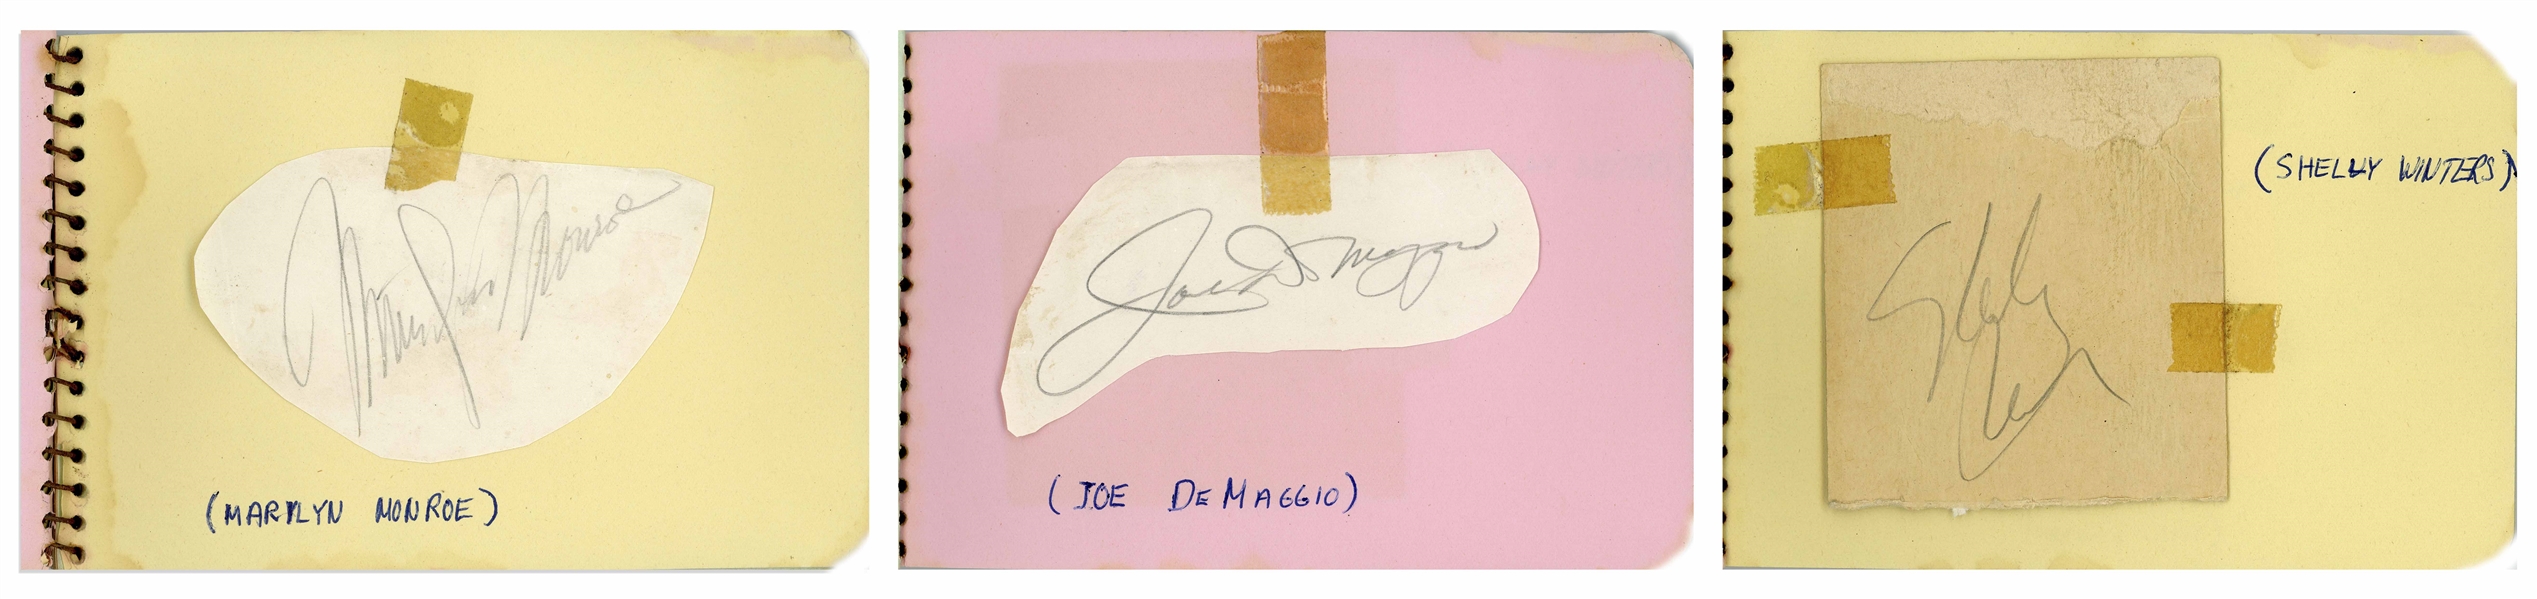 Marilyn Monroe Signature Contained in Autograph Book -- With Joe DiMaggio, Shelley Winters & Other Signatures